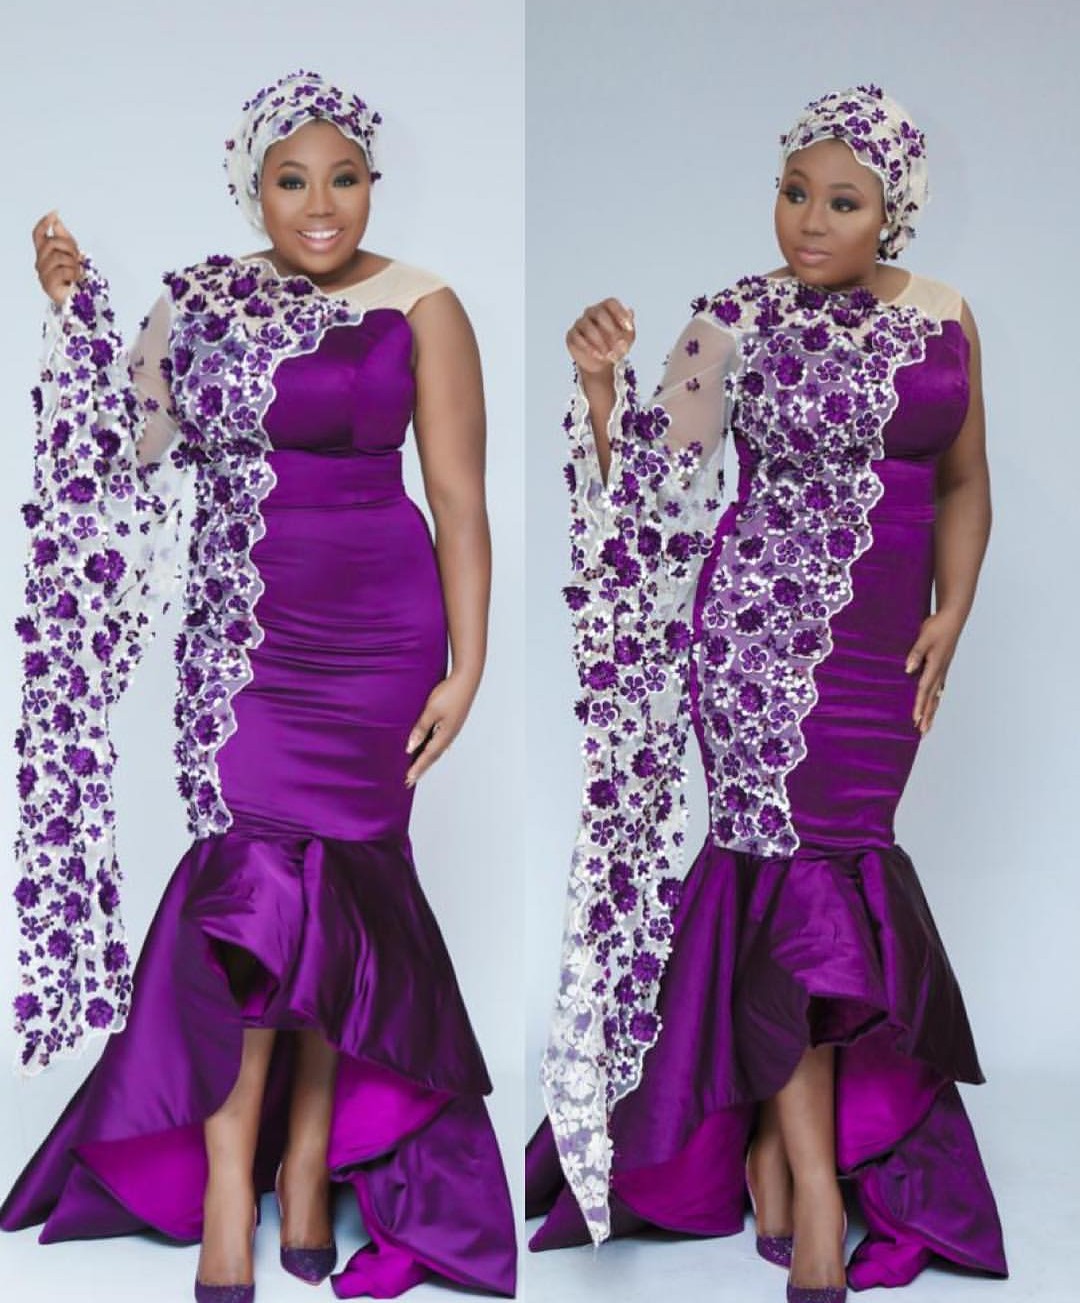 New 2019-2020 African Lace Material Styles - fashionist now